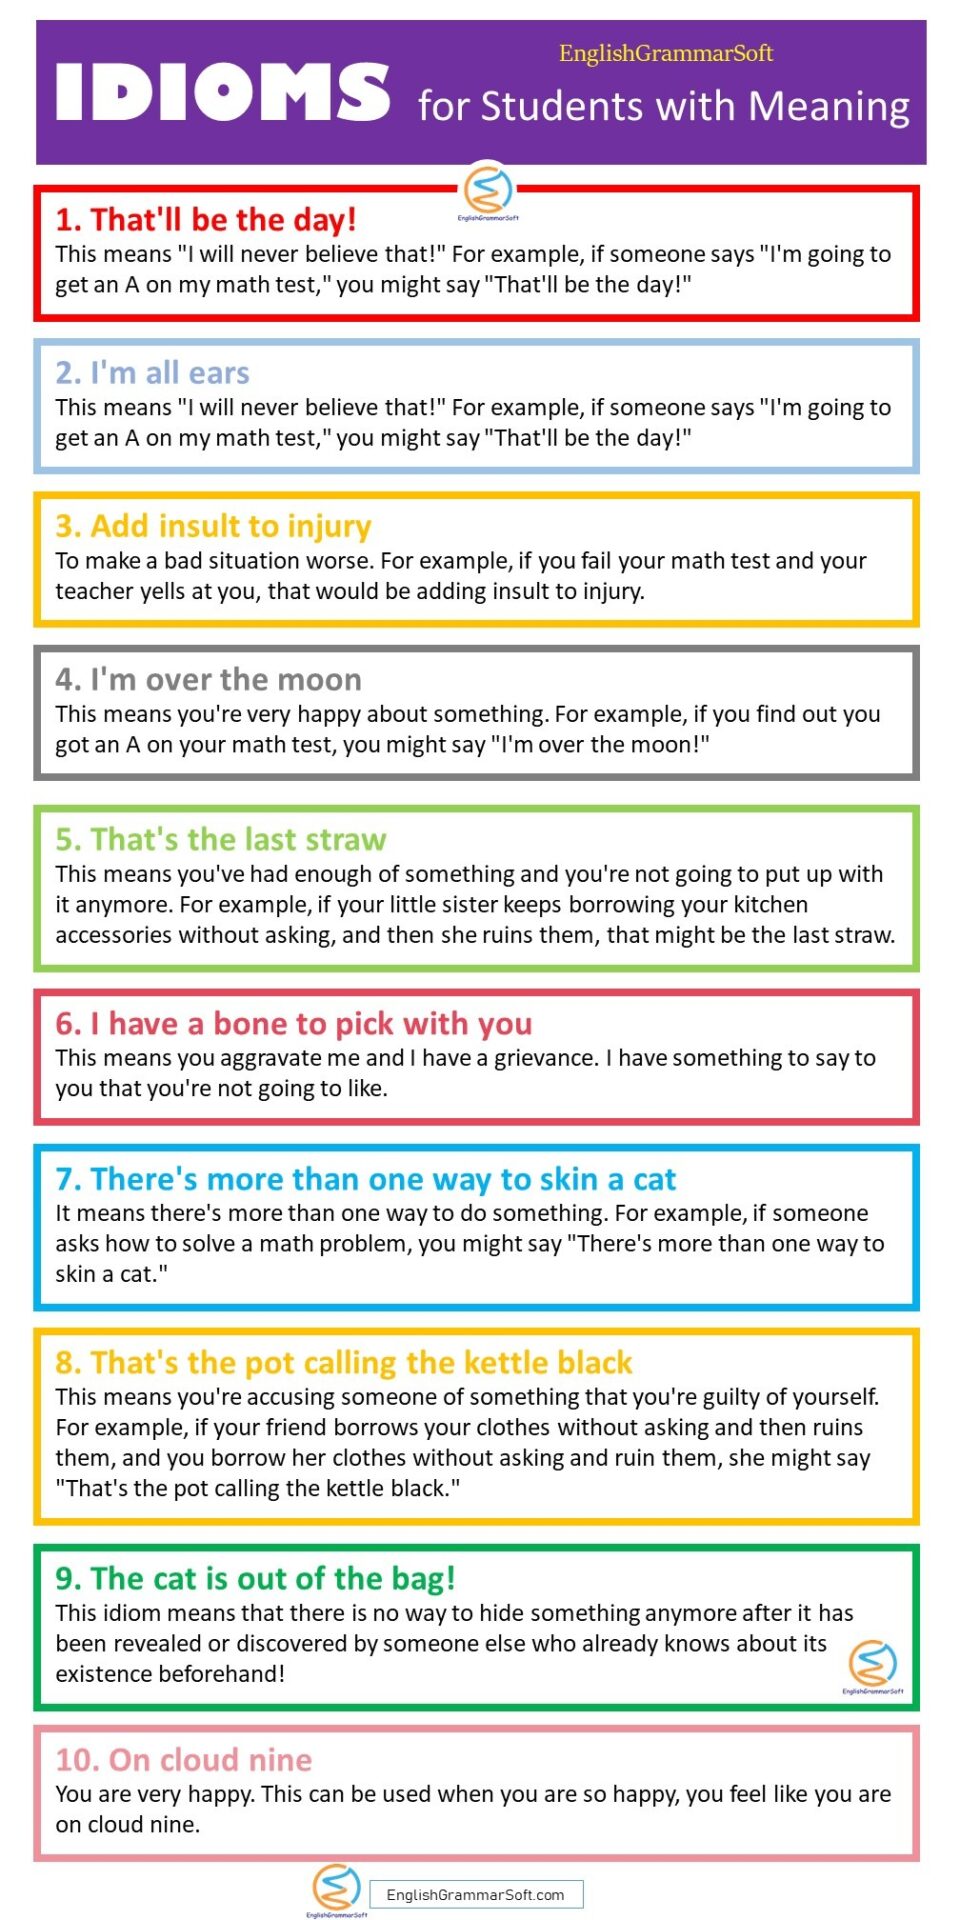 Idioms for Students with Meaning